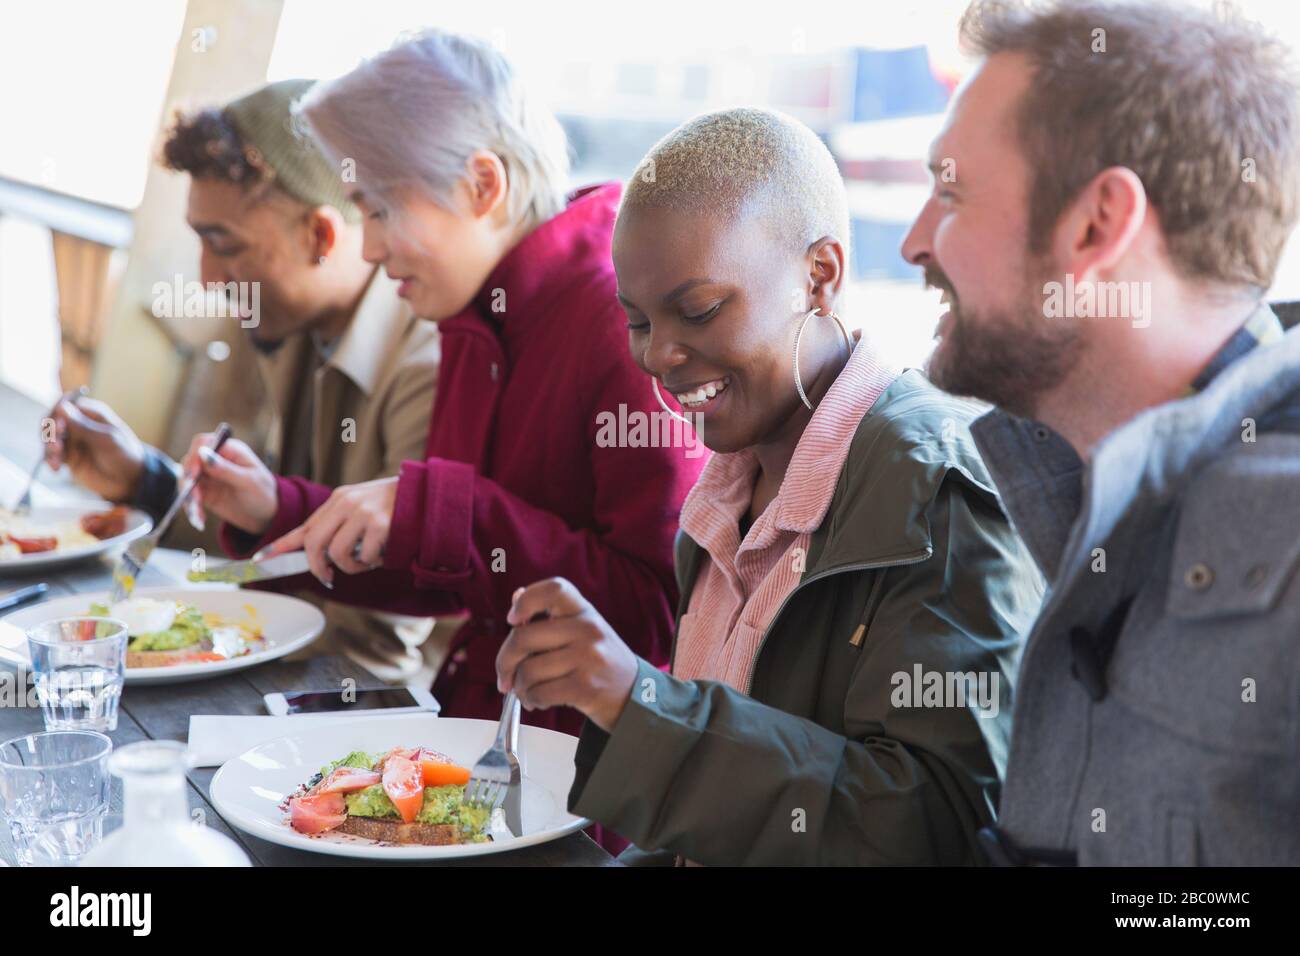 Smiling young woman eating lunch with friends Stock Photo